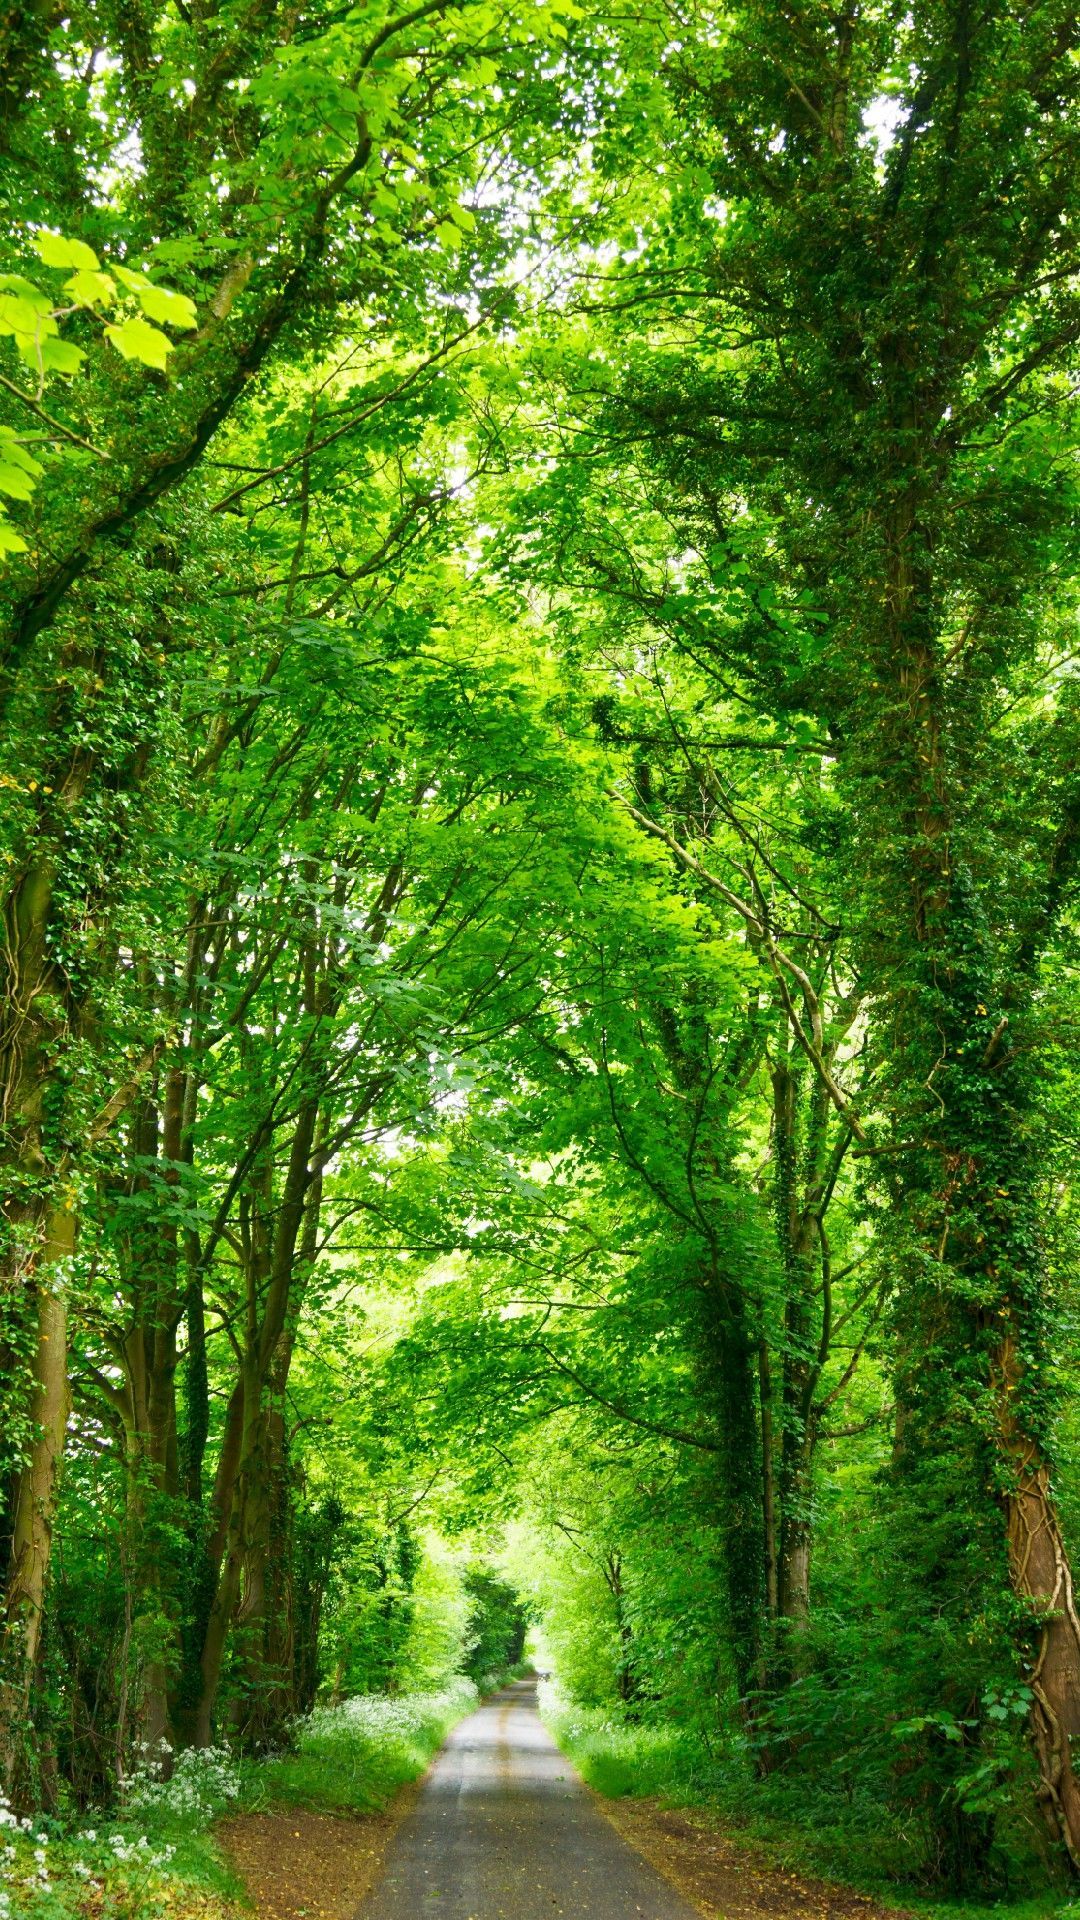 Deep Green Trees Phone Wallpaper Lockscreen HD 4K Android iOS. Nature picture, Beautiful landscapes, Nature image